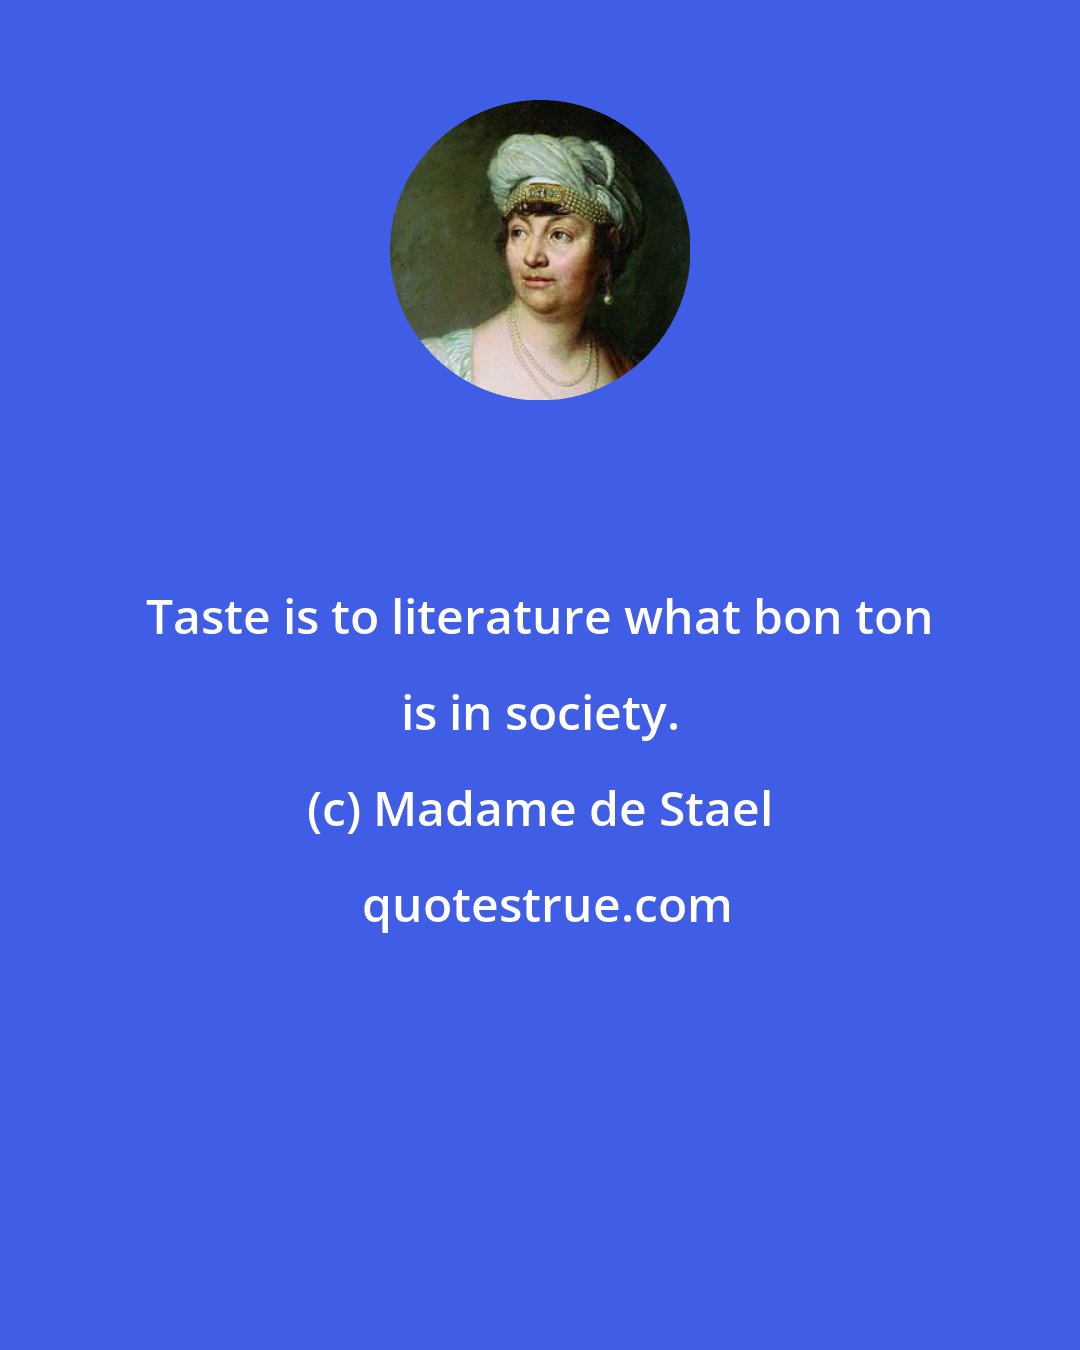 Madame de Stael: Taste is to literature what bon ton is in society.